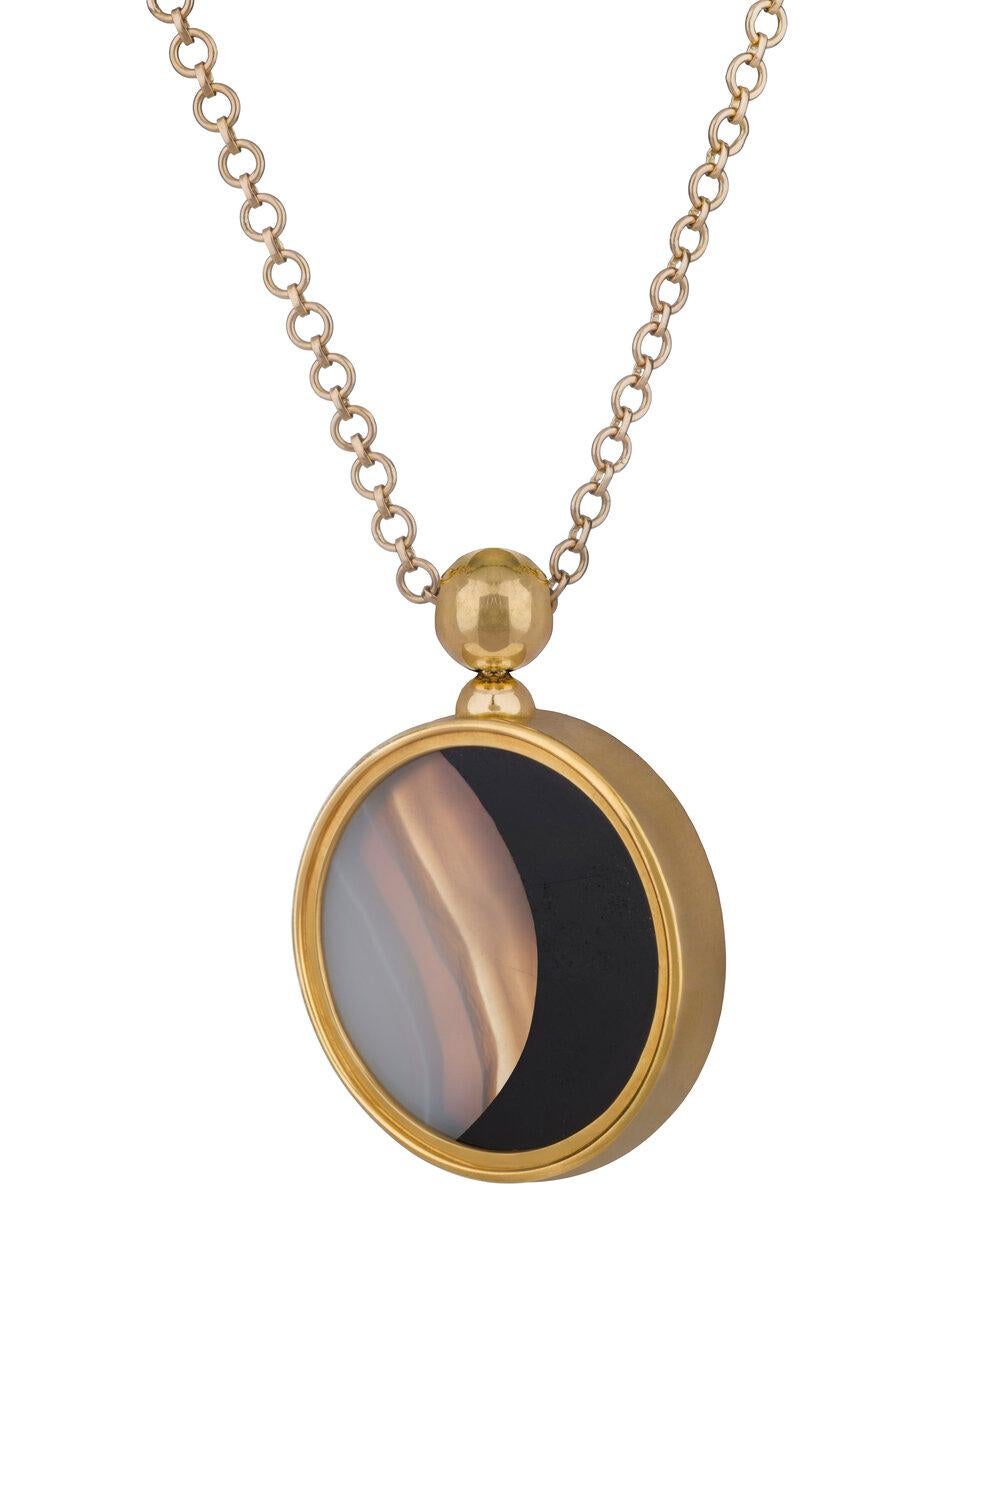 OUROBOROS white and black agate pendant set in 18kt gold.

There are four chain options, all are handmade, 36